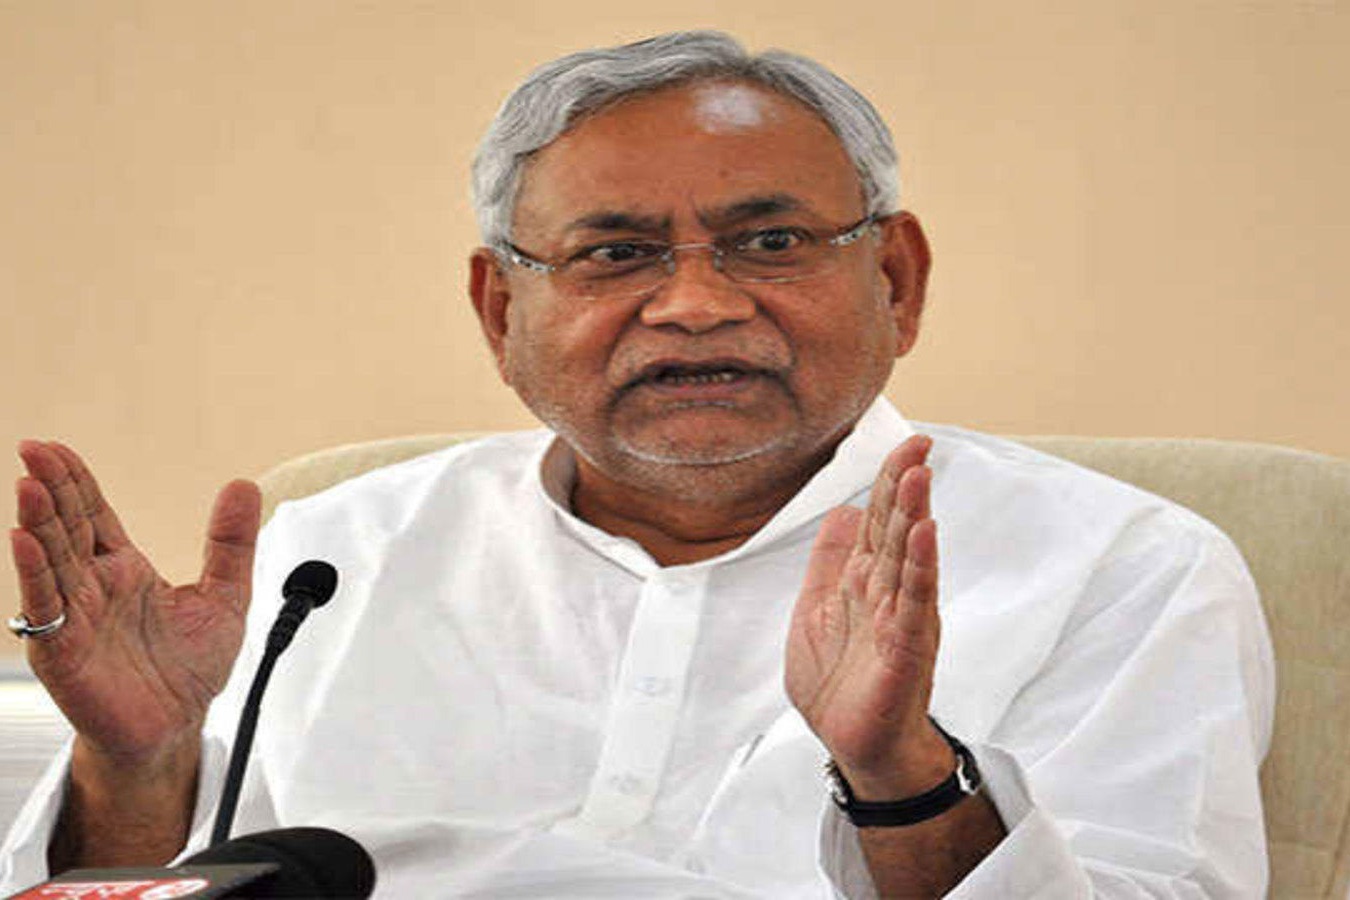 If Sushant Rajputs Father Wants we Can Recommend CBI Probe says Nitish Kumar